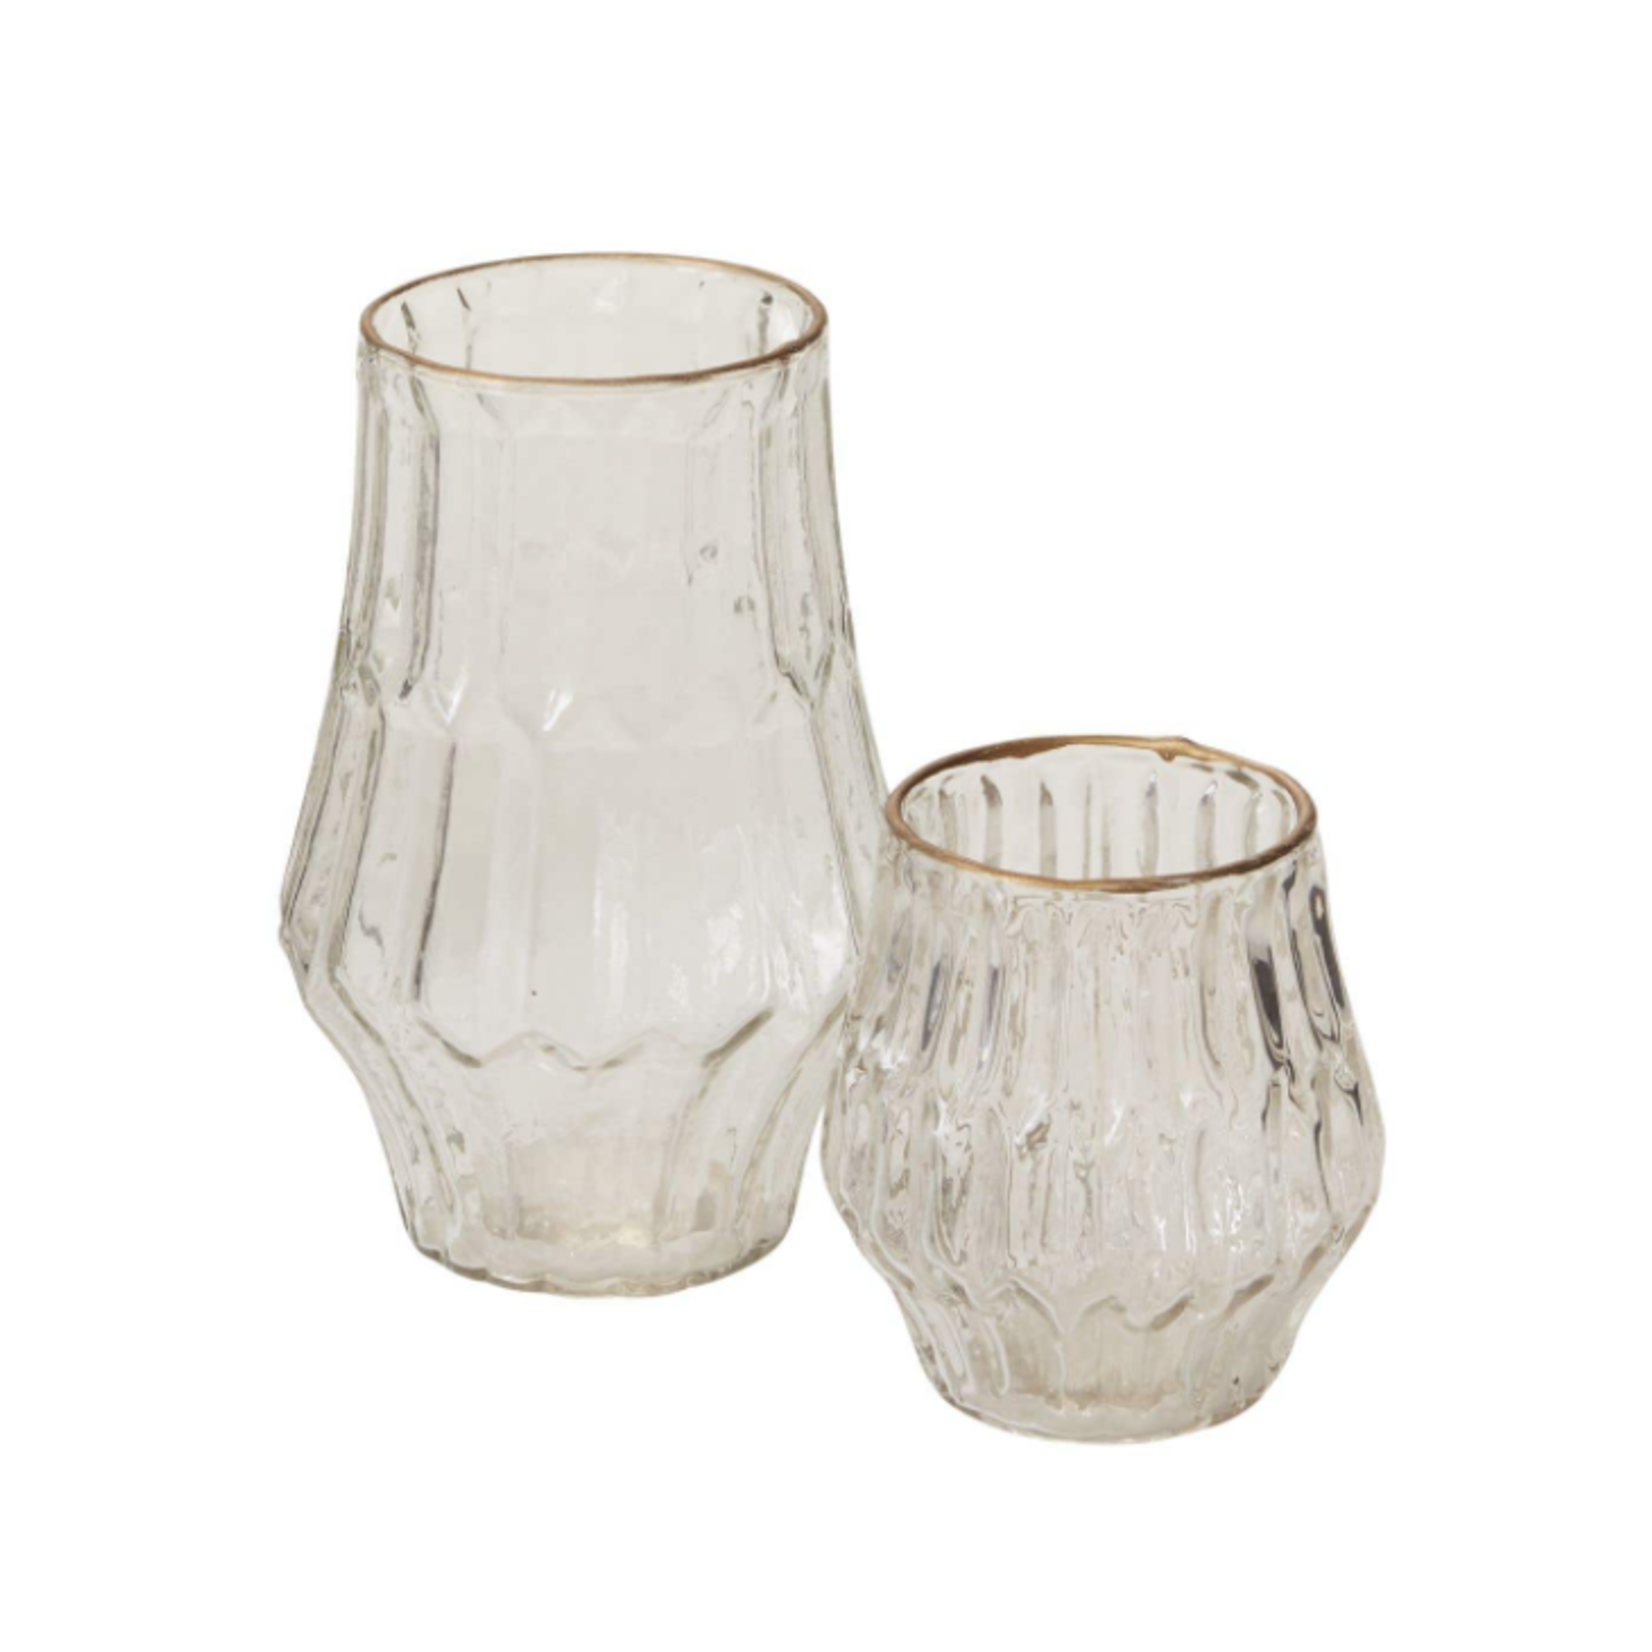 4”H X 3.5” CLEAR GLASS KATHERINE VOTIVE WITH GOLD LIP